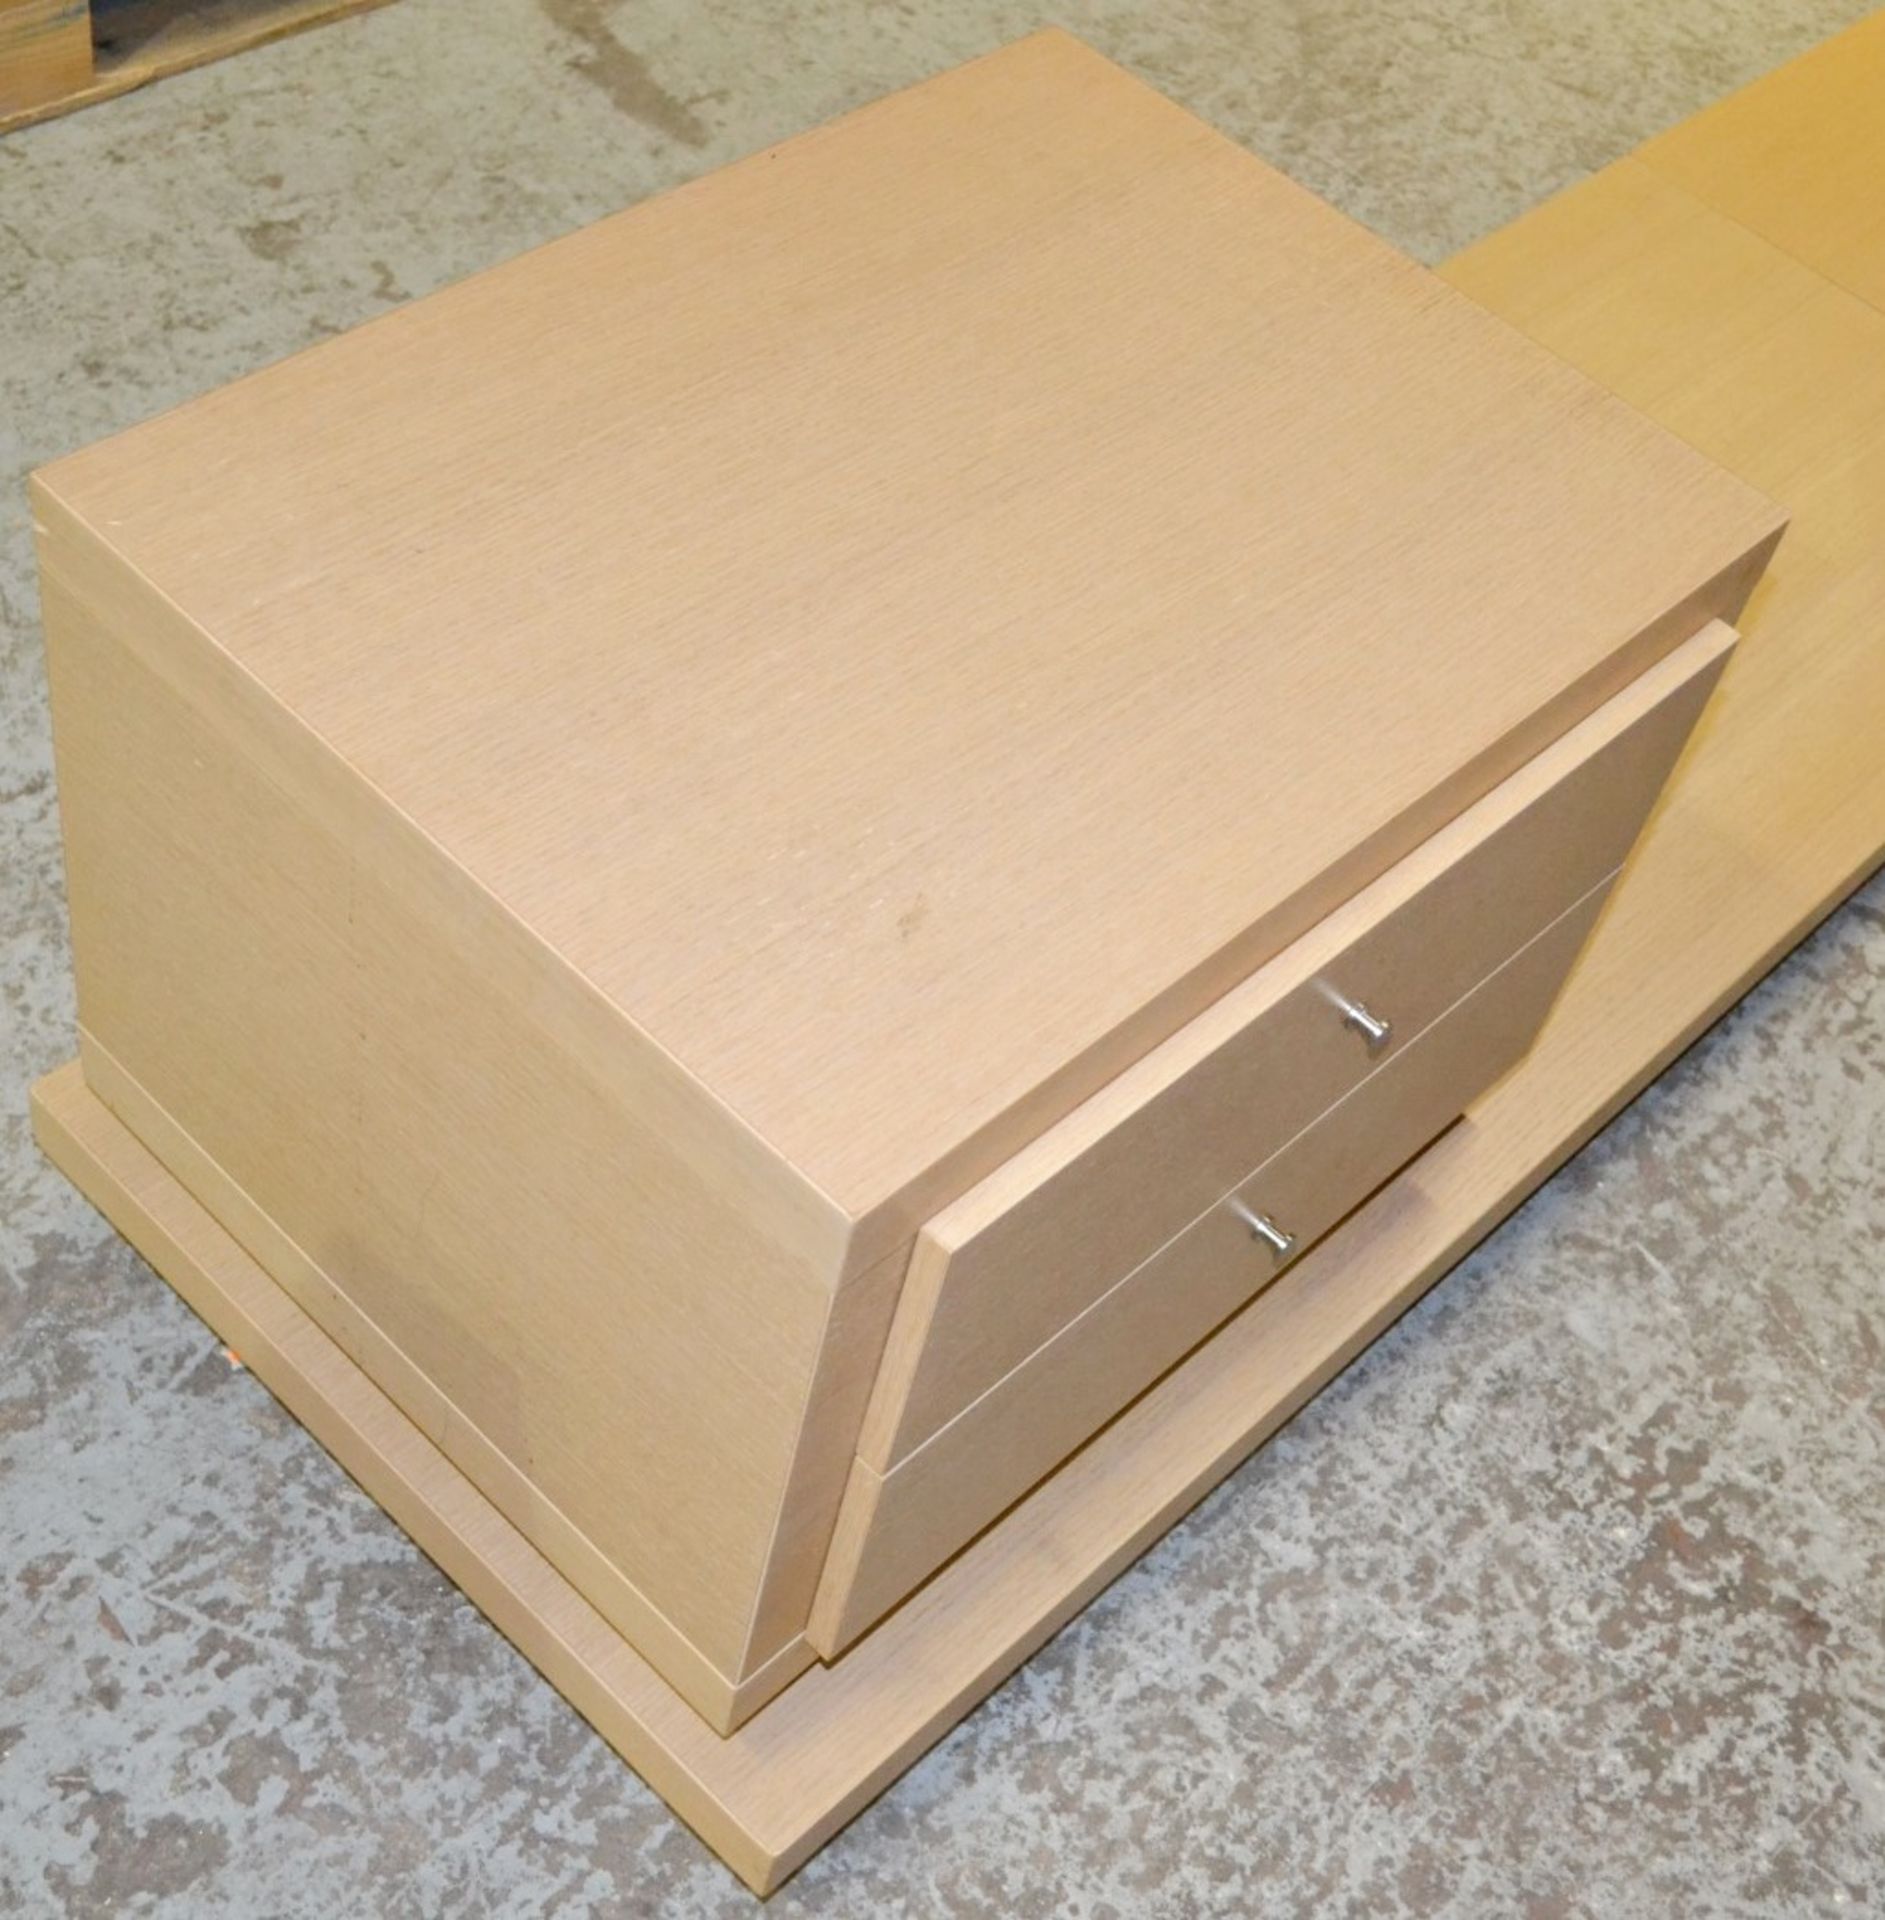 2 x Bedside Cabinets On Underbed Plinth With A Classic Oak Finish - 3 Metres Wide  - Used In Good - Image 5 of 8